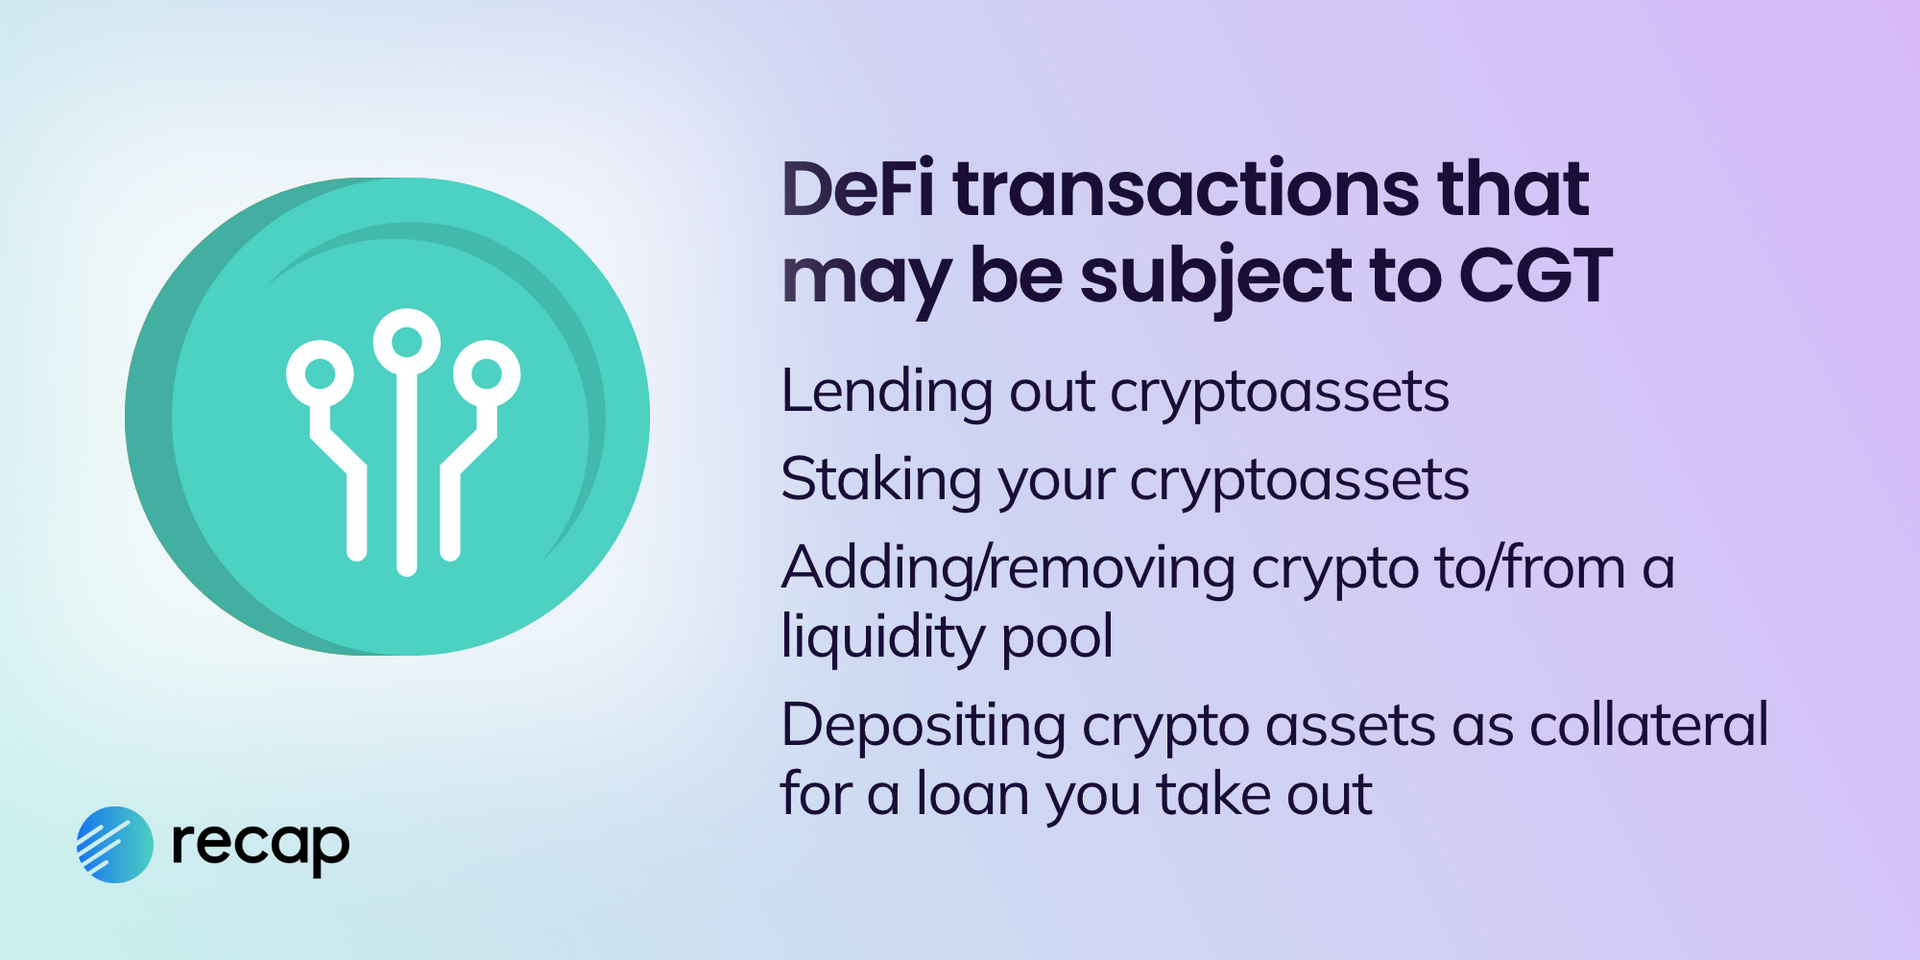 Infographic stating that some DeFi transactions may be subject to CGT, including lending and staking cryptoassets, adding or removing crypto to/from a liquidity pool and depositing cryptoassets as collateral